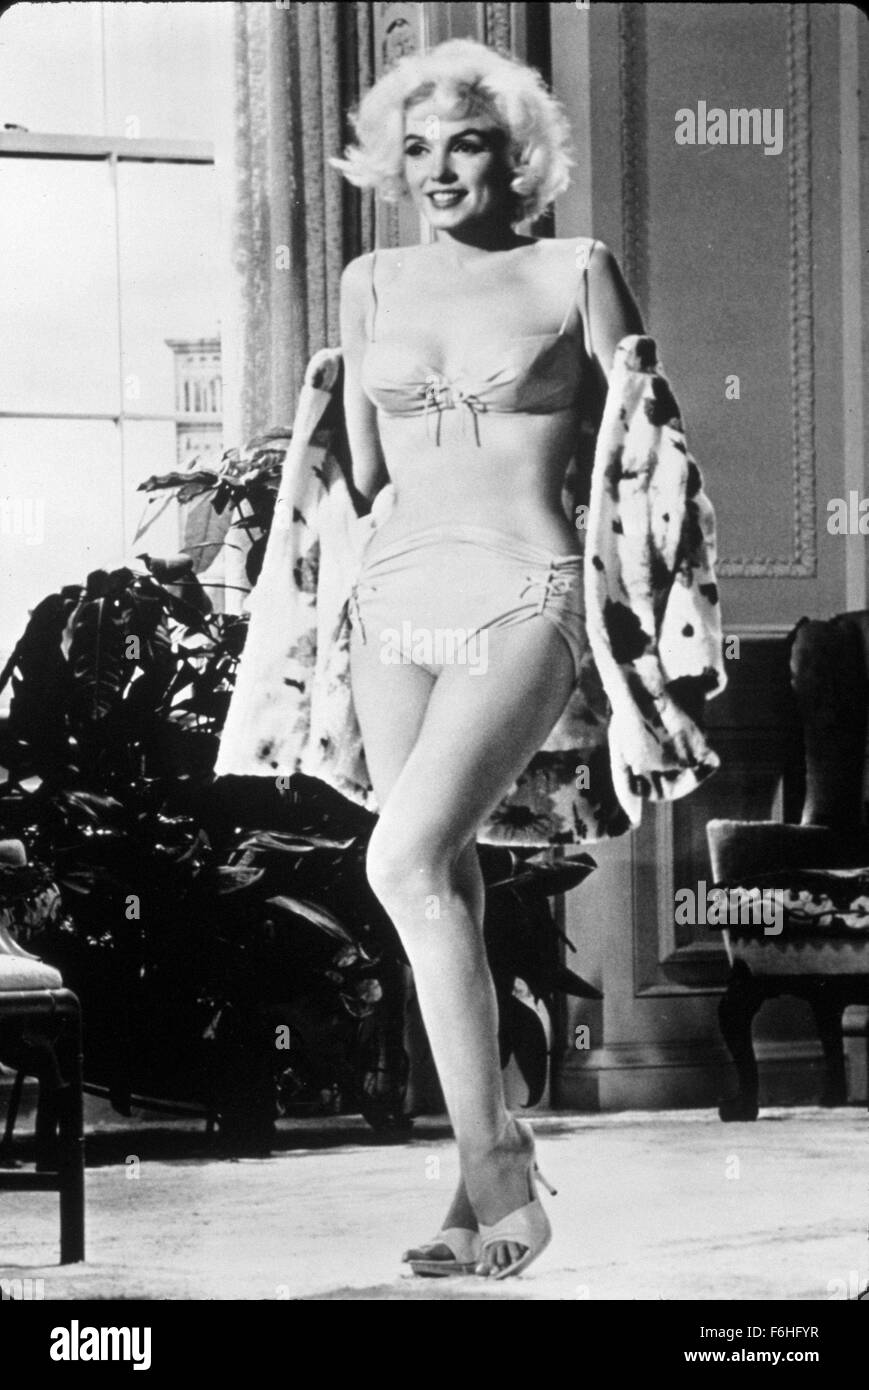 1962, Film Title: SOMETHING'S GOT TO GIVE, Director: GEORGE CUKOR, Studio: FOX, Pictured: 1962, UNCOMFORTABLE, MARILYN MONROE, PIN-UPS, SELF CONSCIOUS, SWIM SUIT, BIKINI, MIDRIFF, LEGS, HIGH HEELS, SHOES, INTERIOR, SMILING, PLAYFUL, FORCED. (Credit Image: SNAP) Stock Photo